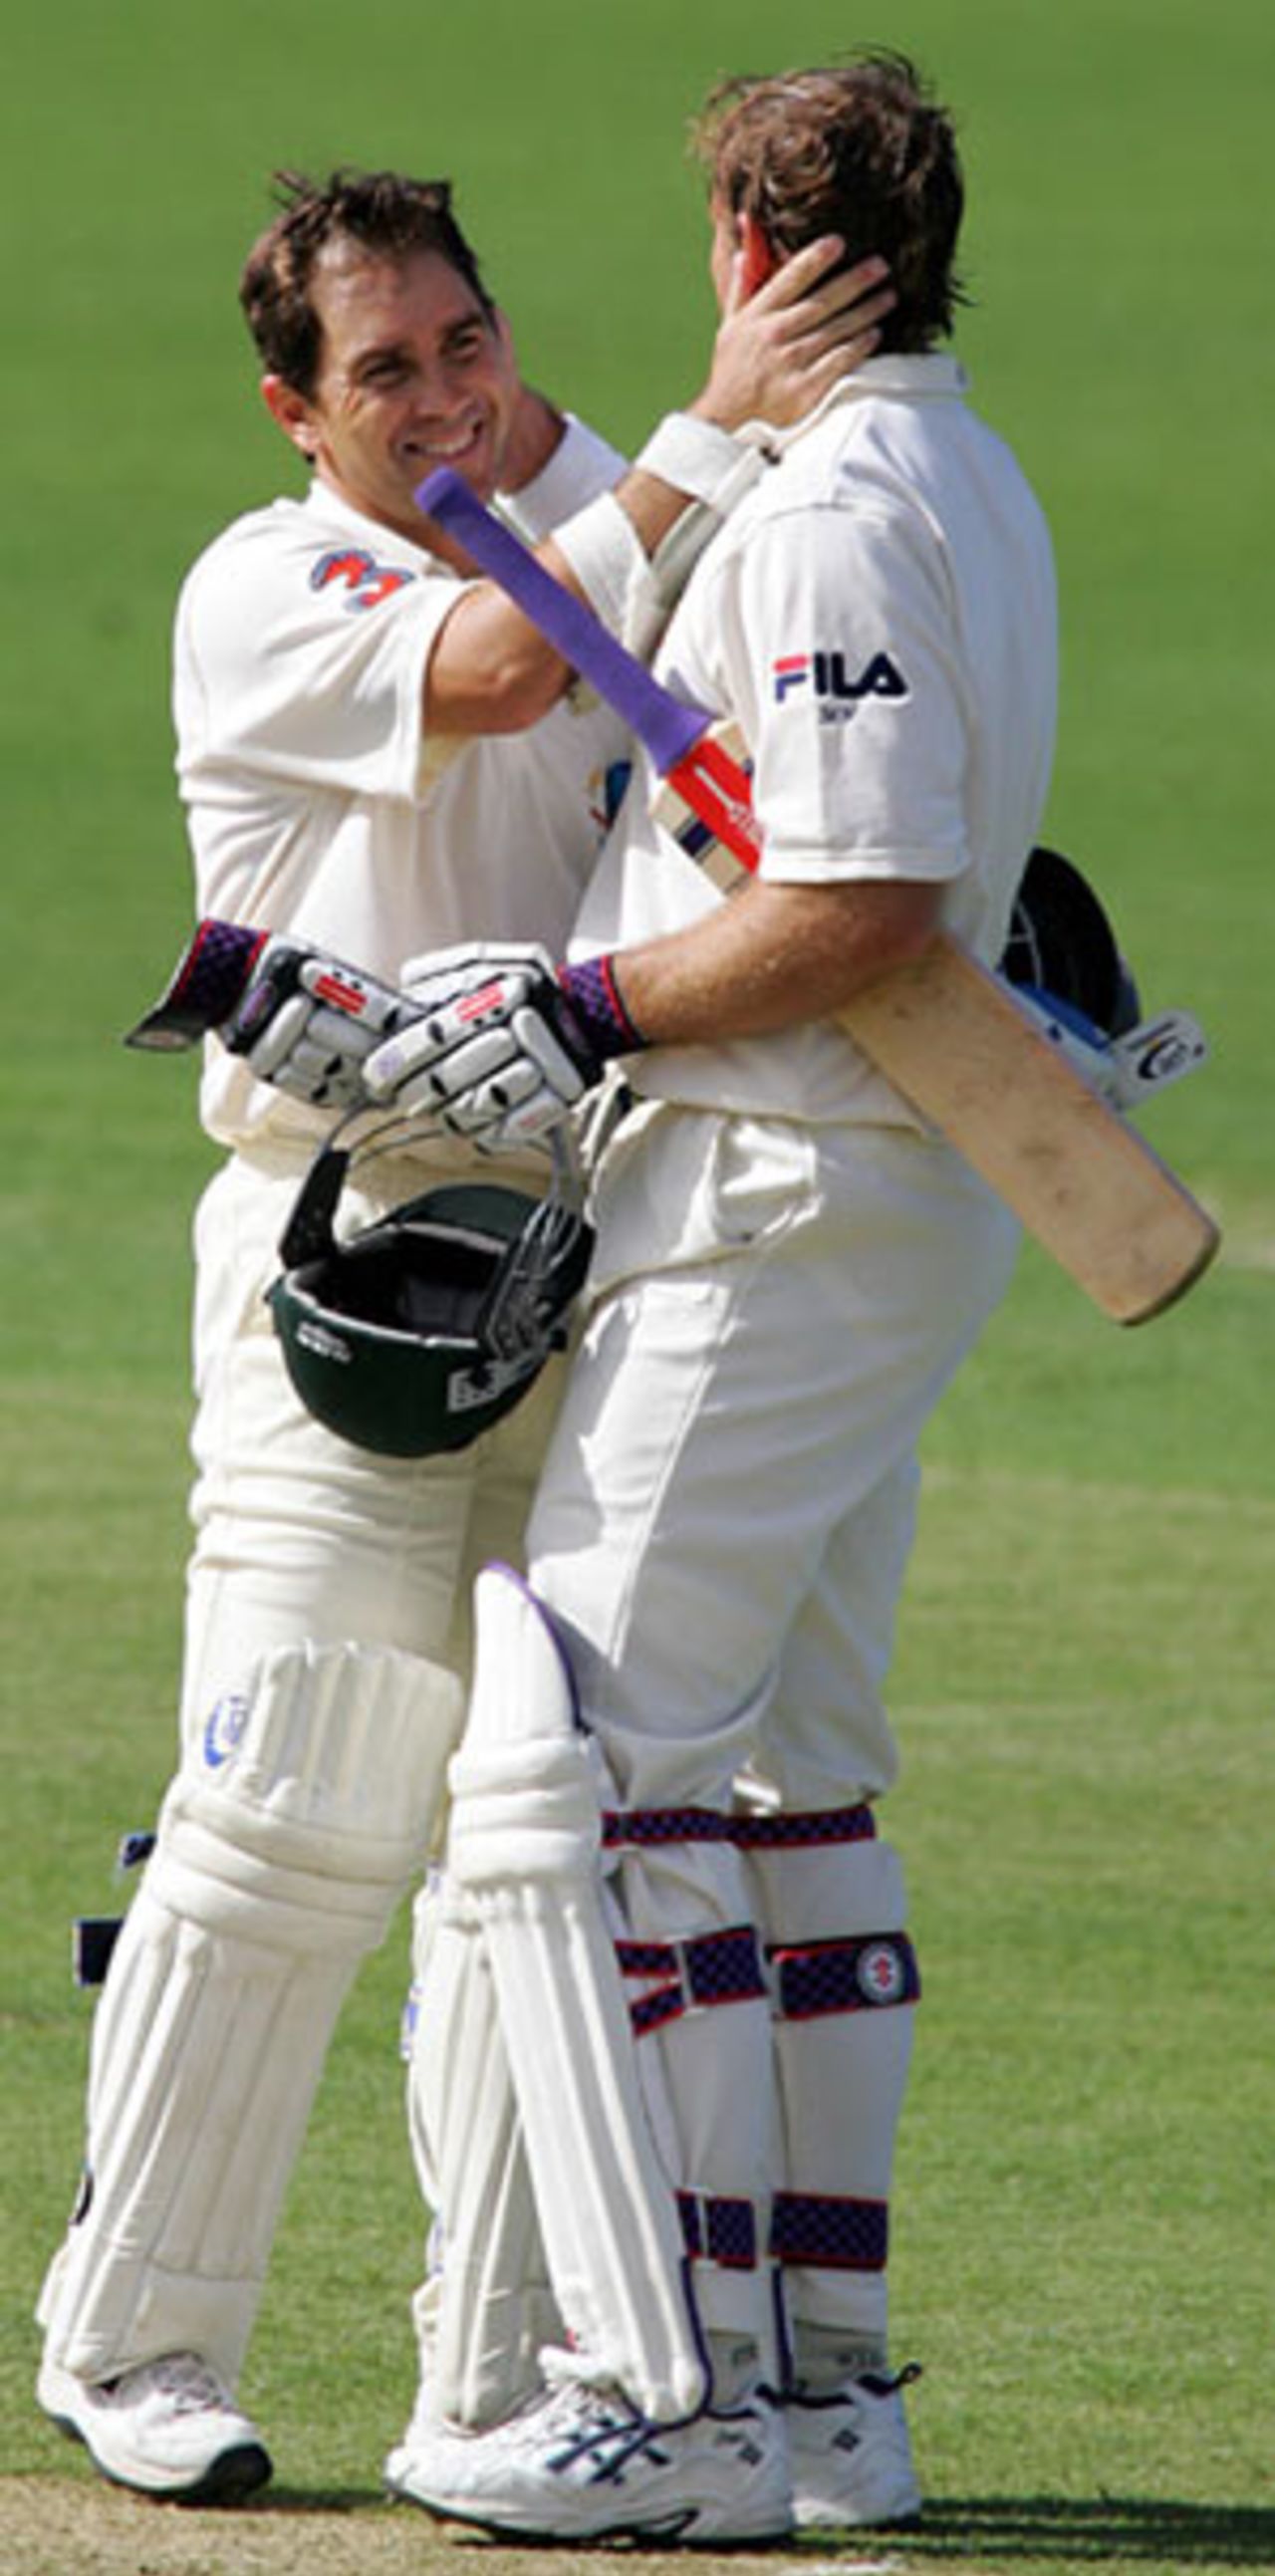 Matthew Hayden is congratulated by Justin Langer on reaching his hundred, Australia v Sri Lanka, 2nd Test, Cairns, 1st day, July 9, 2004